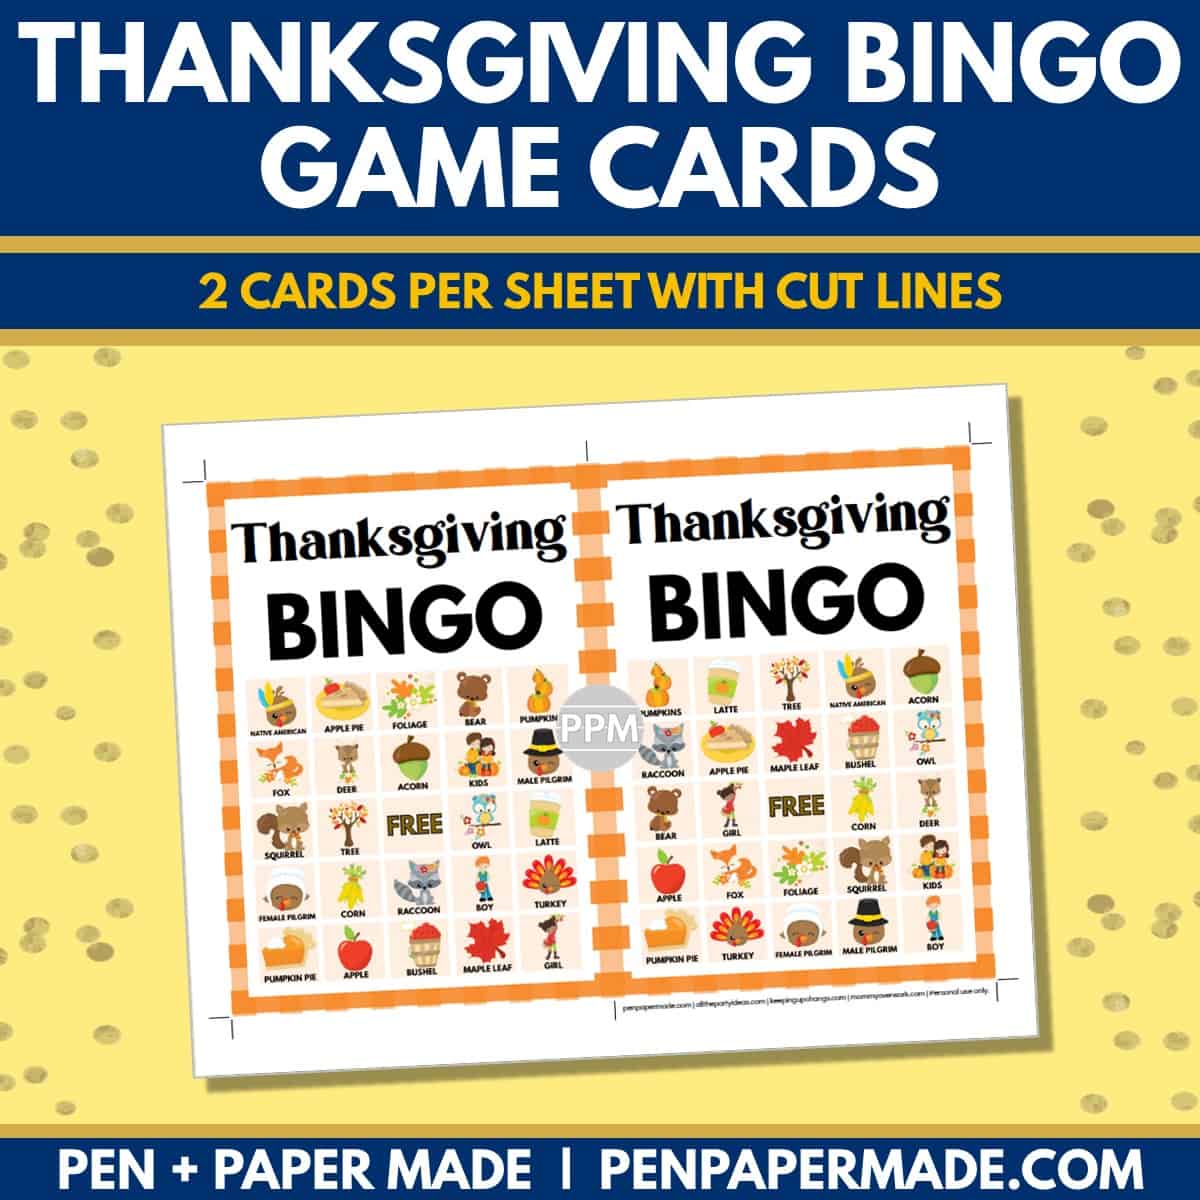 thanksgiving bingo card 5x5 5x7 game boards with images and text words.